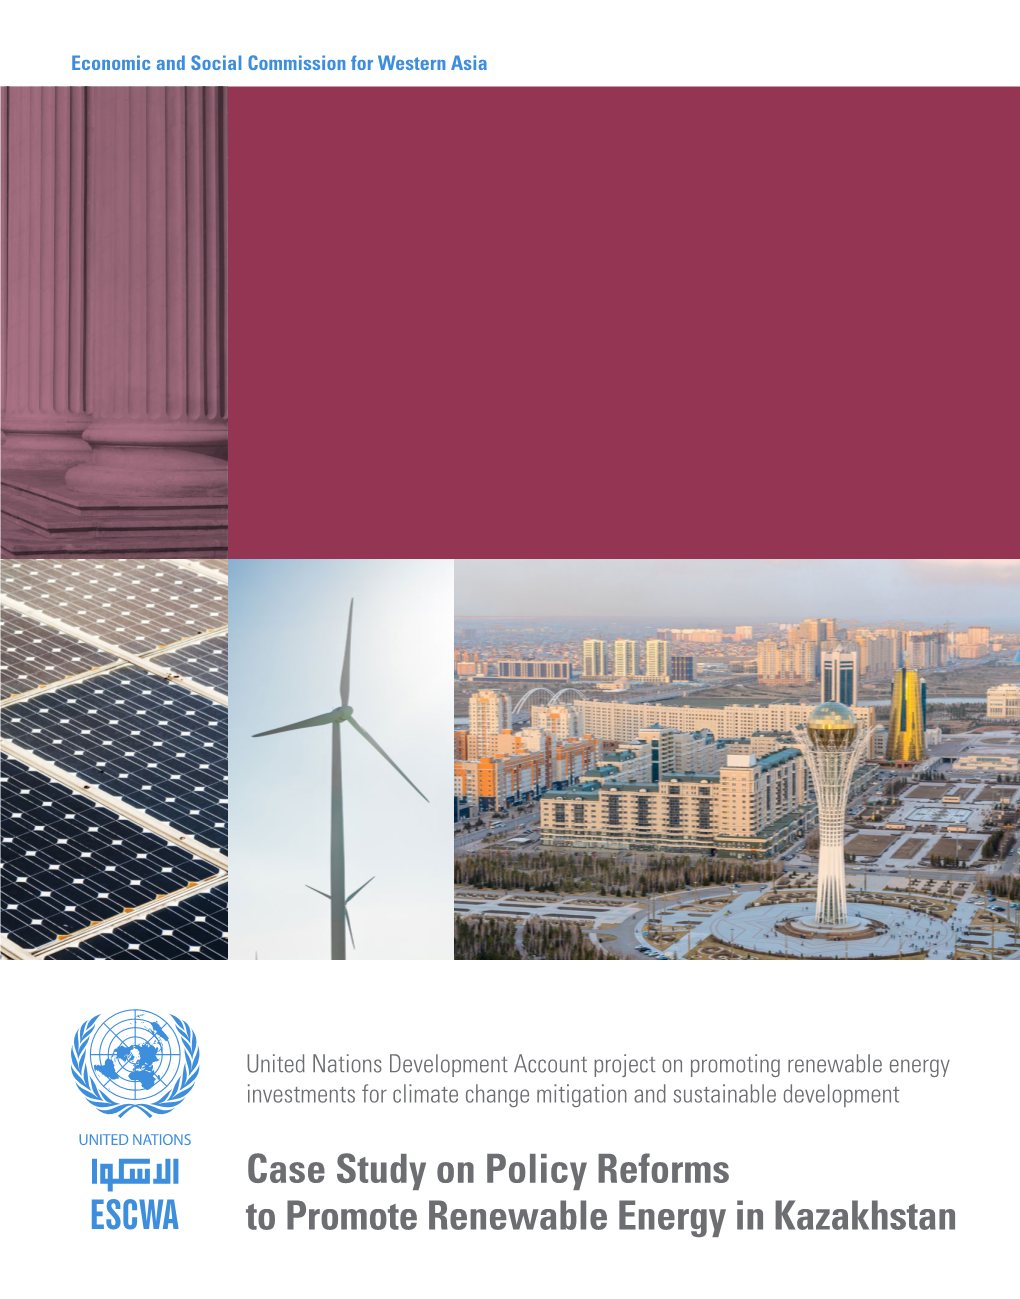 Case Study on Policy Reforms to Promote Renewable Energy in Kazakhstan E/ESCWA/SDPD/2017/CP.11